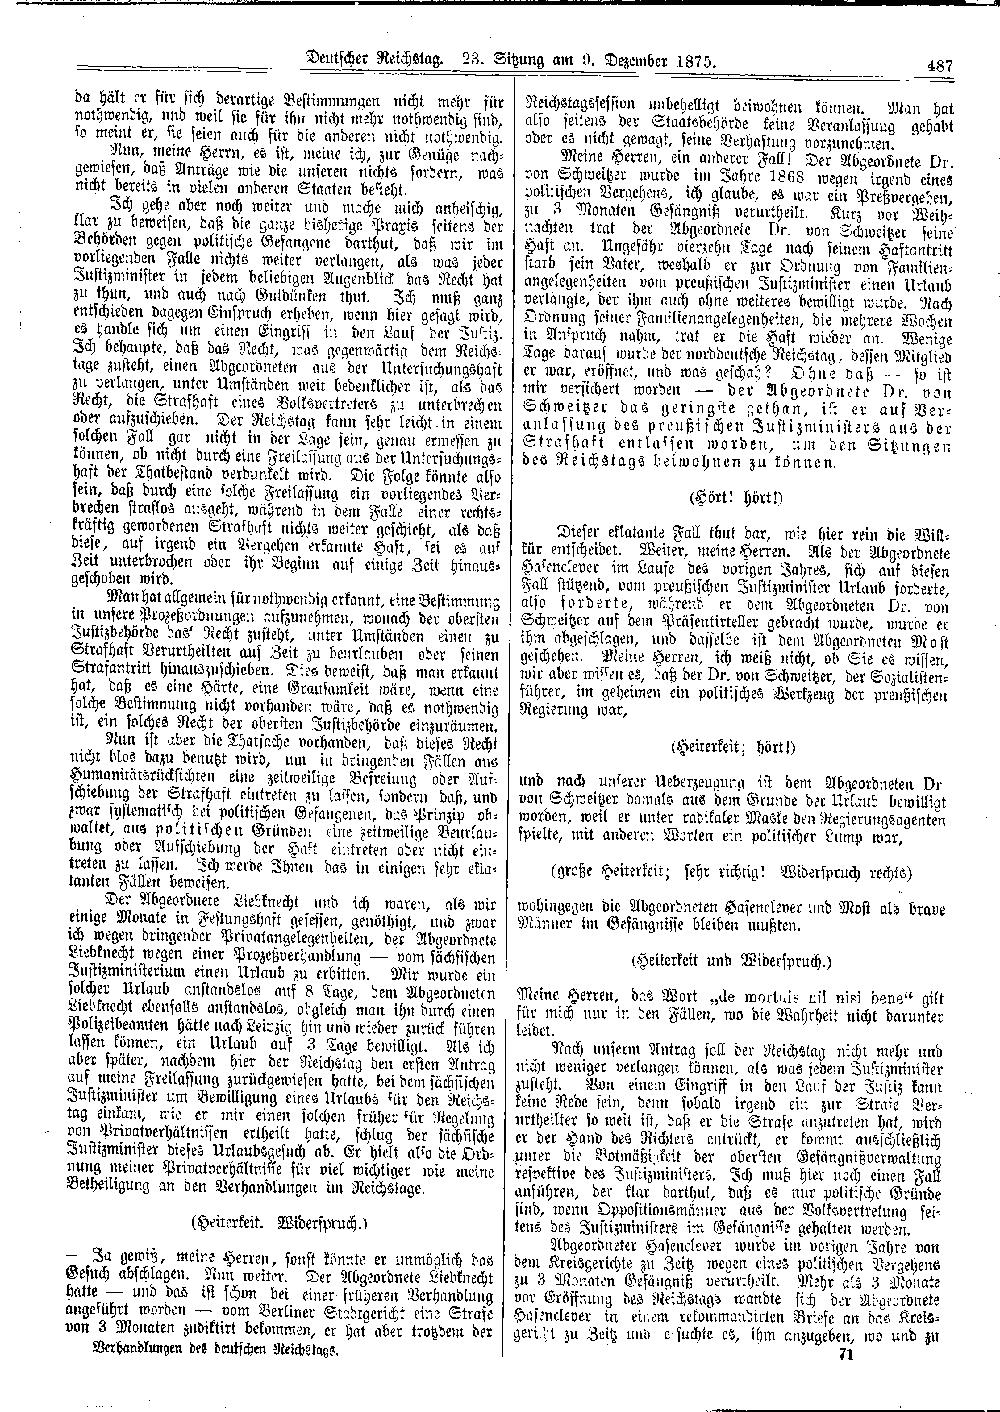 Scan of page 487